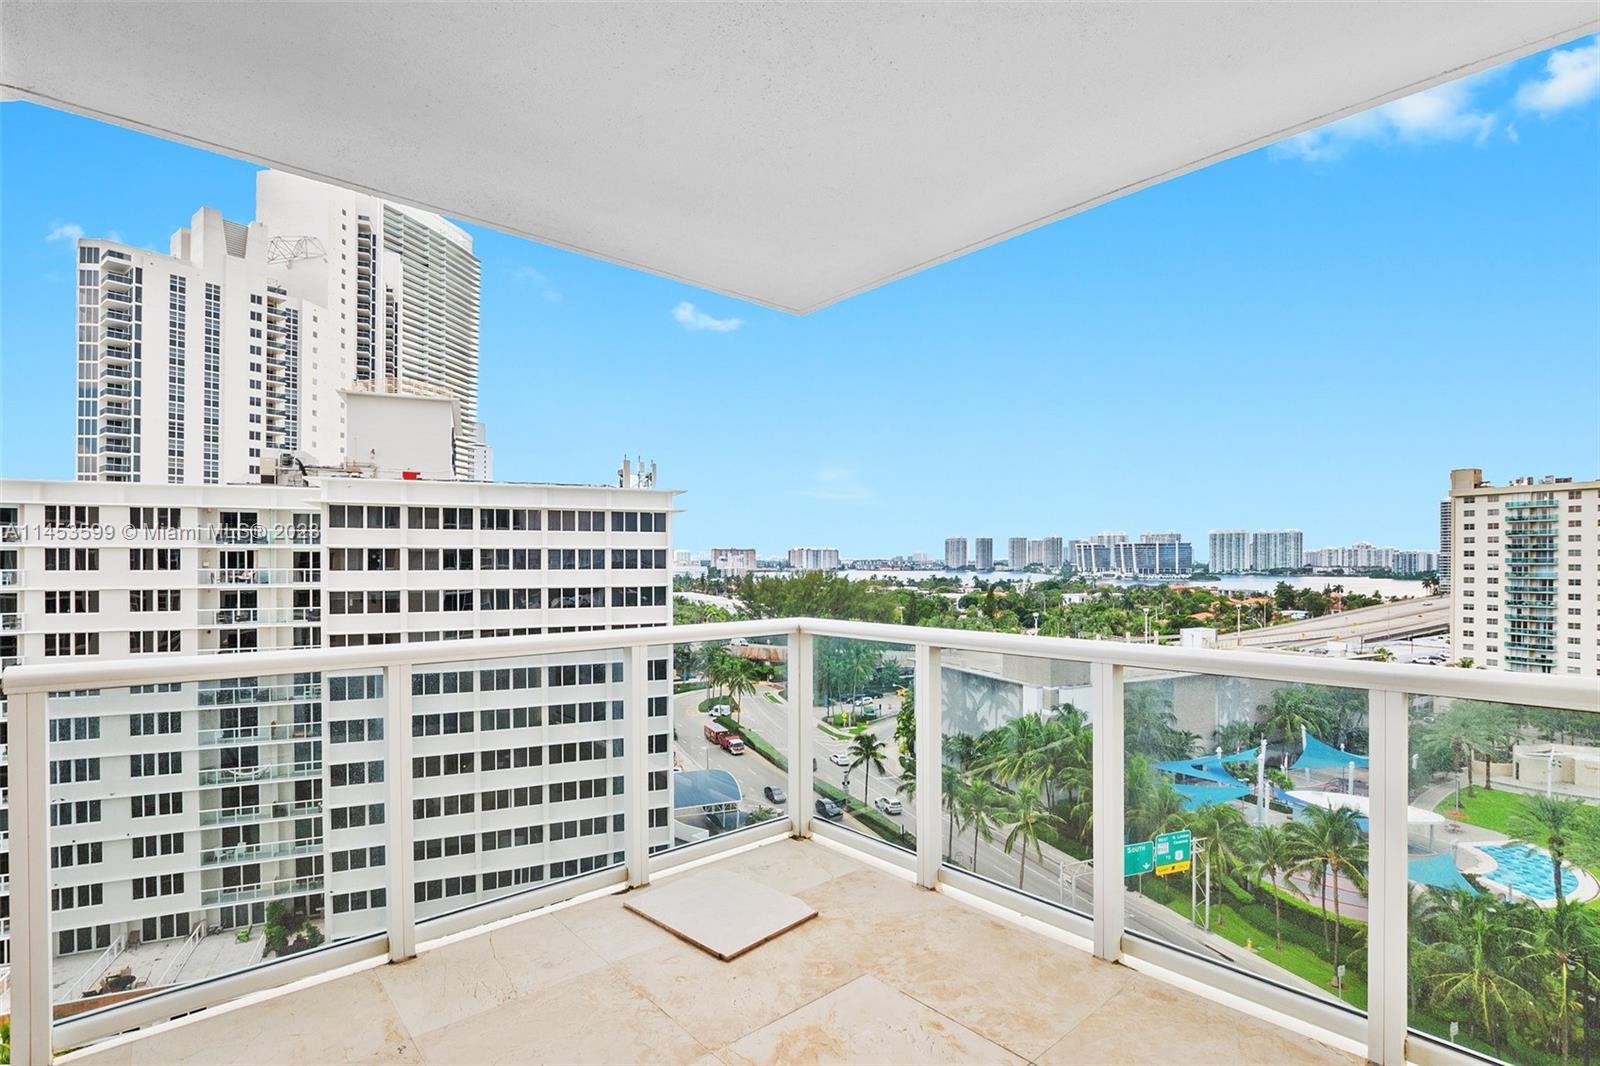 Fabulous 3 bdrm 4 full baths corner condo with the most spectacular sunset views in Sunny Isles Beach! Large eat in kitchen, Great (living/dining) room surrounded by windows! One of the brightest apartments in the building! Master bedroom has his and hers walk in closets and bathroom, all bedrooms have en-suite facilities. Full service building with concierge, cafe, valet, gym, gym classes daily, beach service & more!